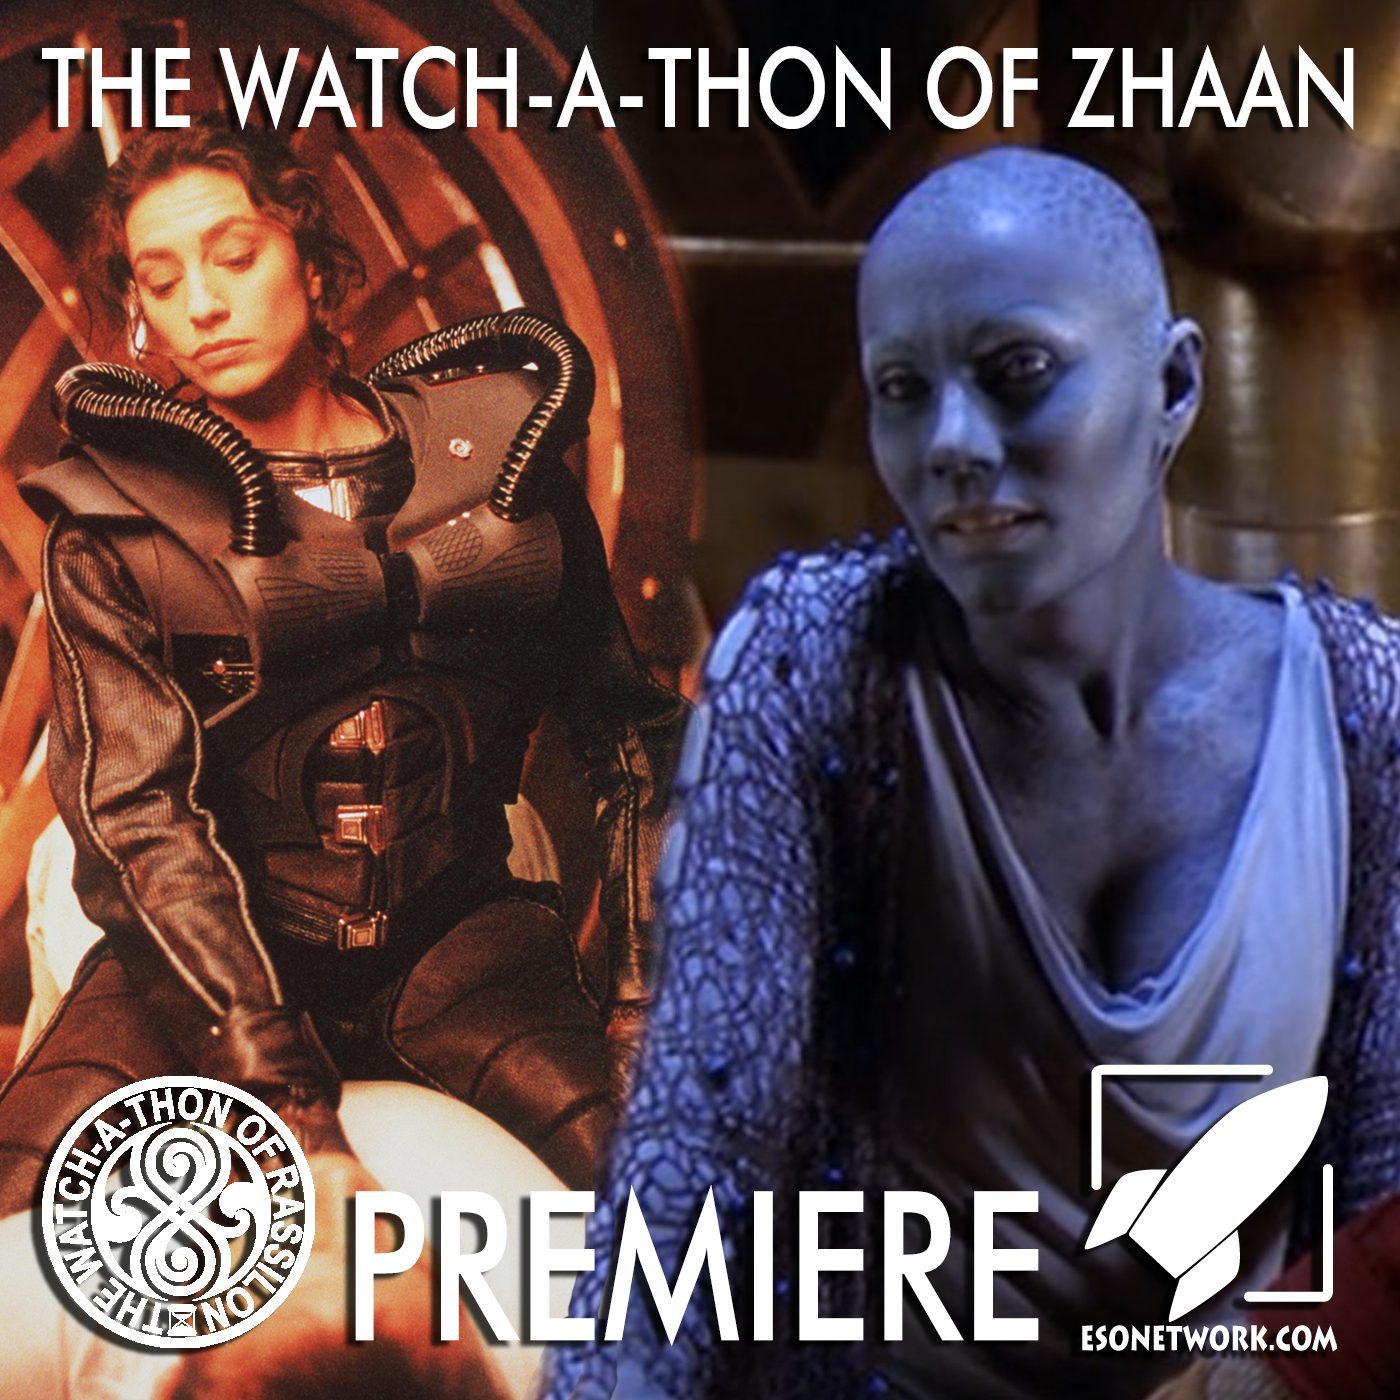 The Watch-A-Thon of Zhaan: Premiere